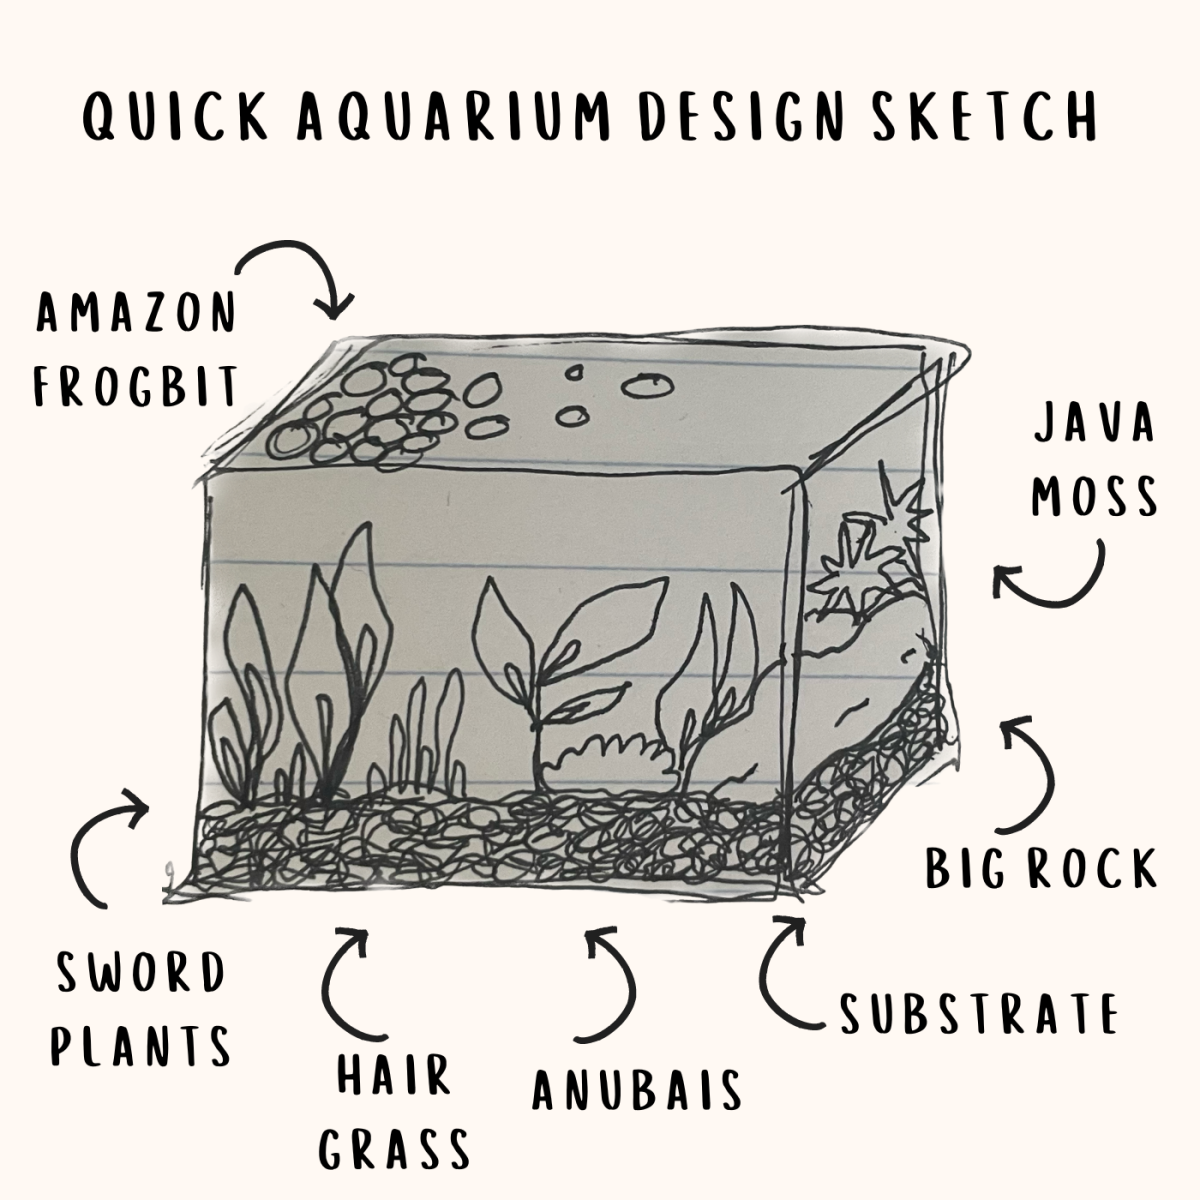 How to Build a Self-Sustaining Aquarium (Step-by-Step Guide